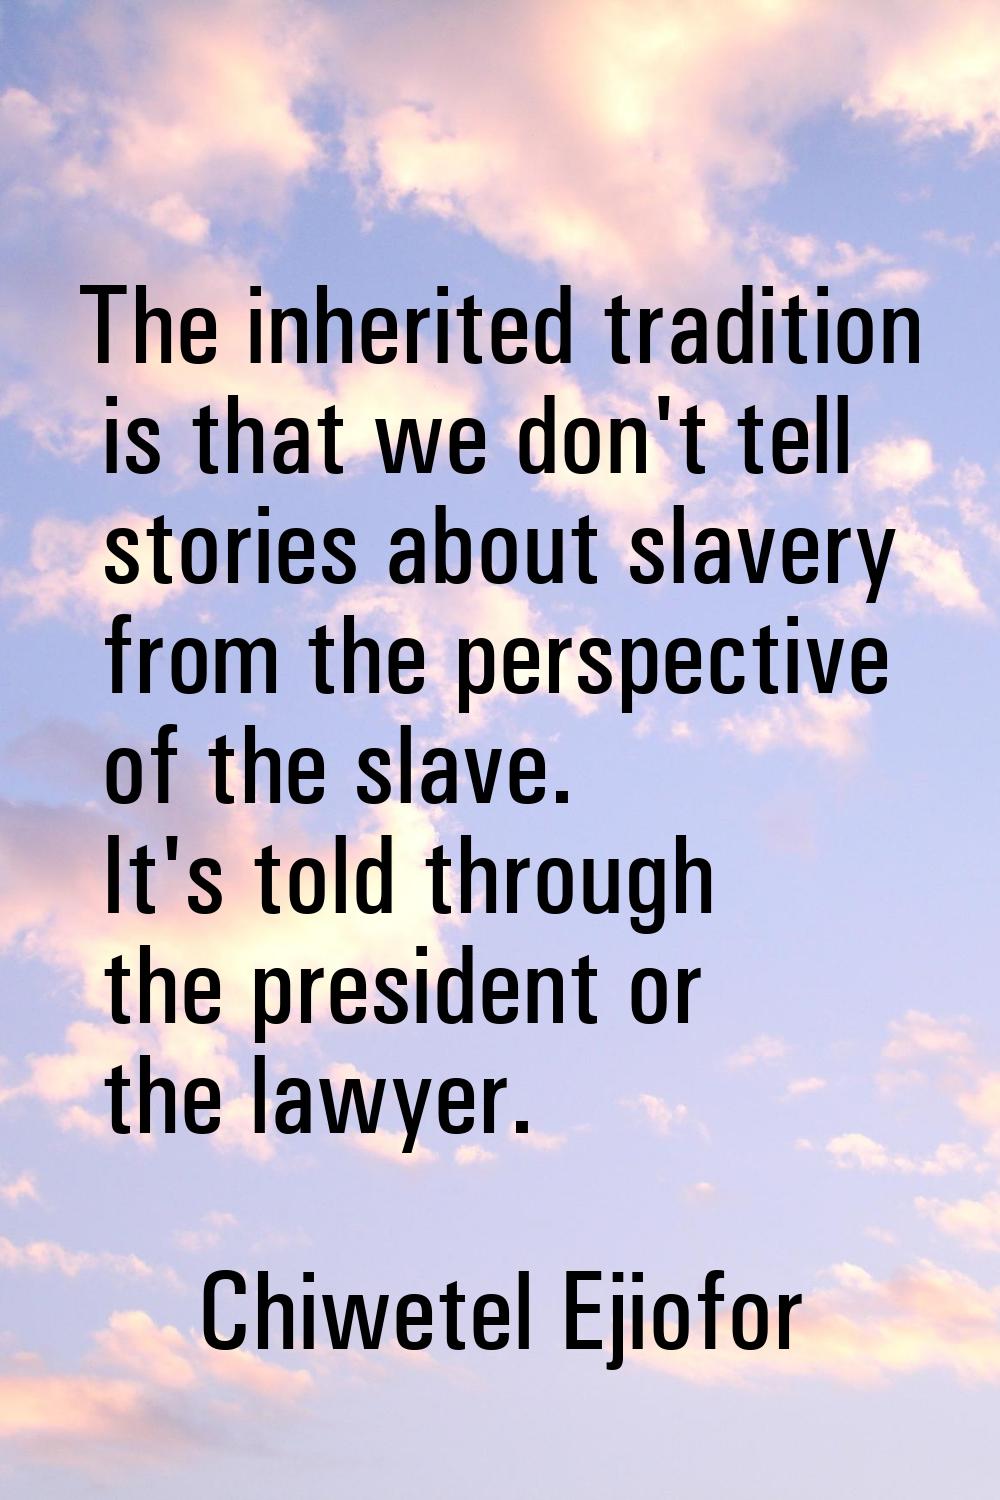 The inherited tradition is that we don't tell stories about slavery from the perspective of the sla